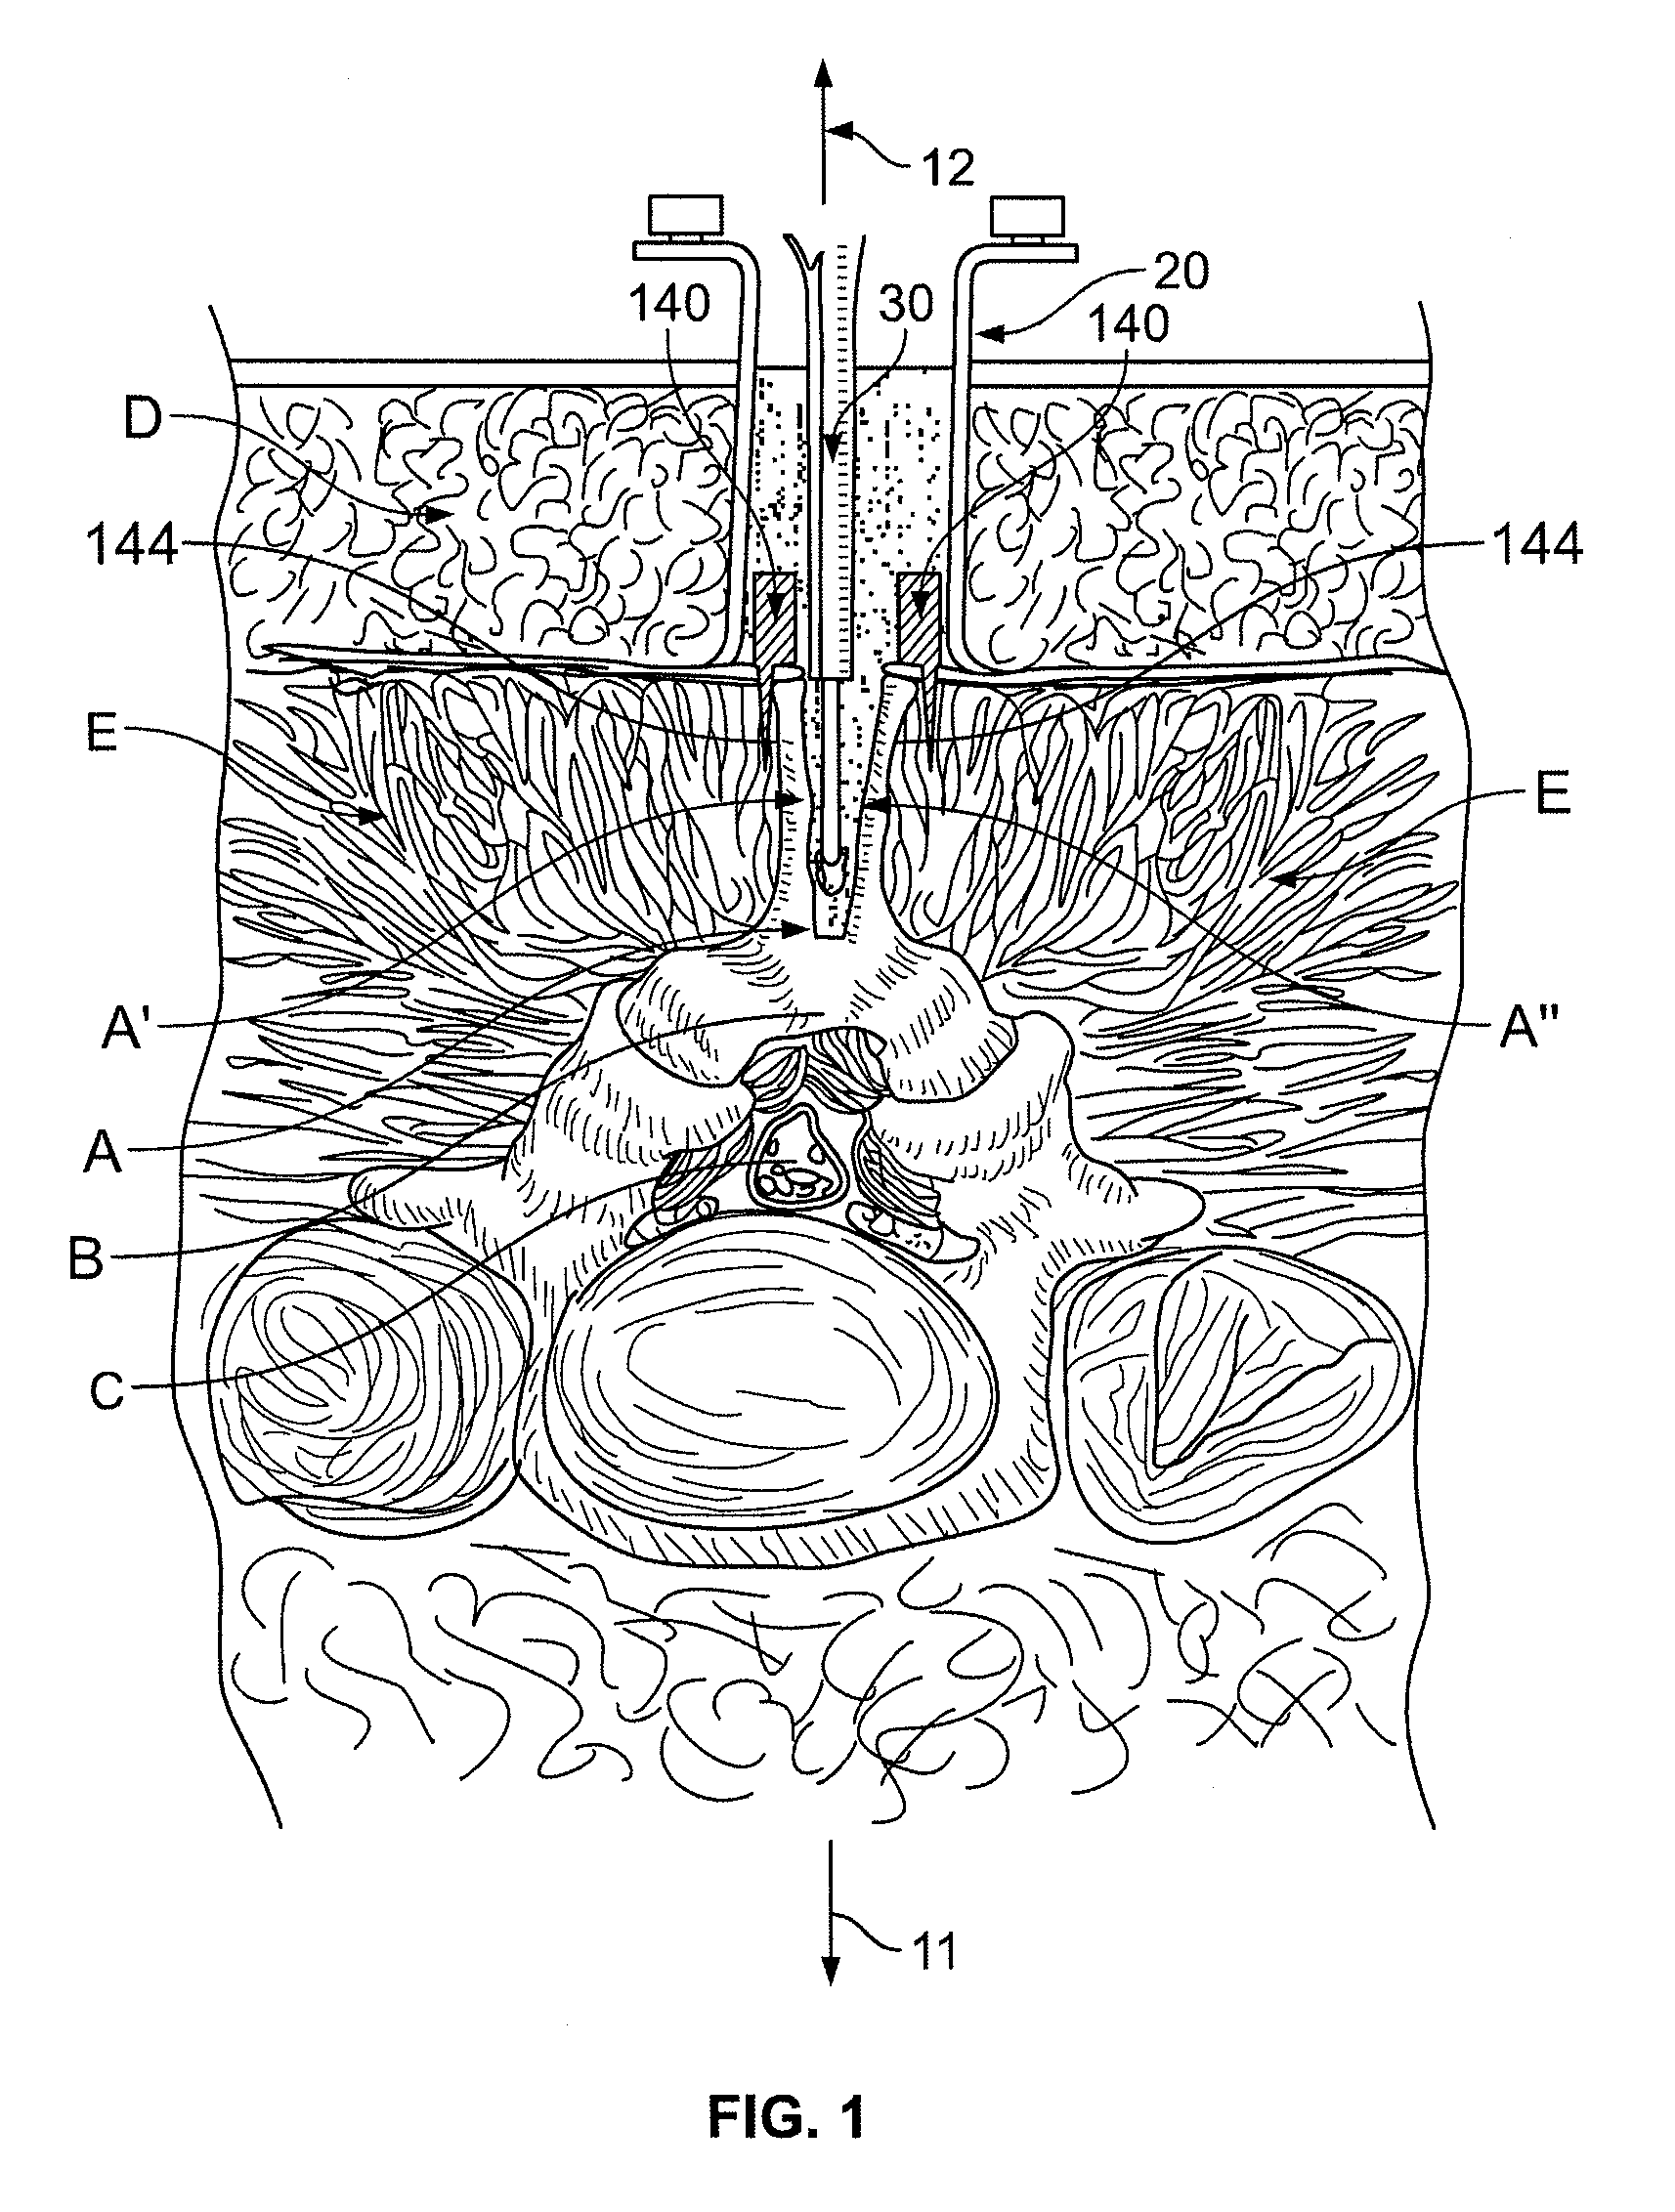 System and Method for Centering Surgical Cutting Tools About the Spinous Process or Other Bone Structure